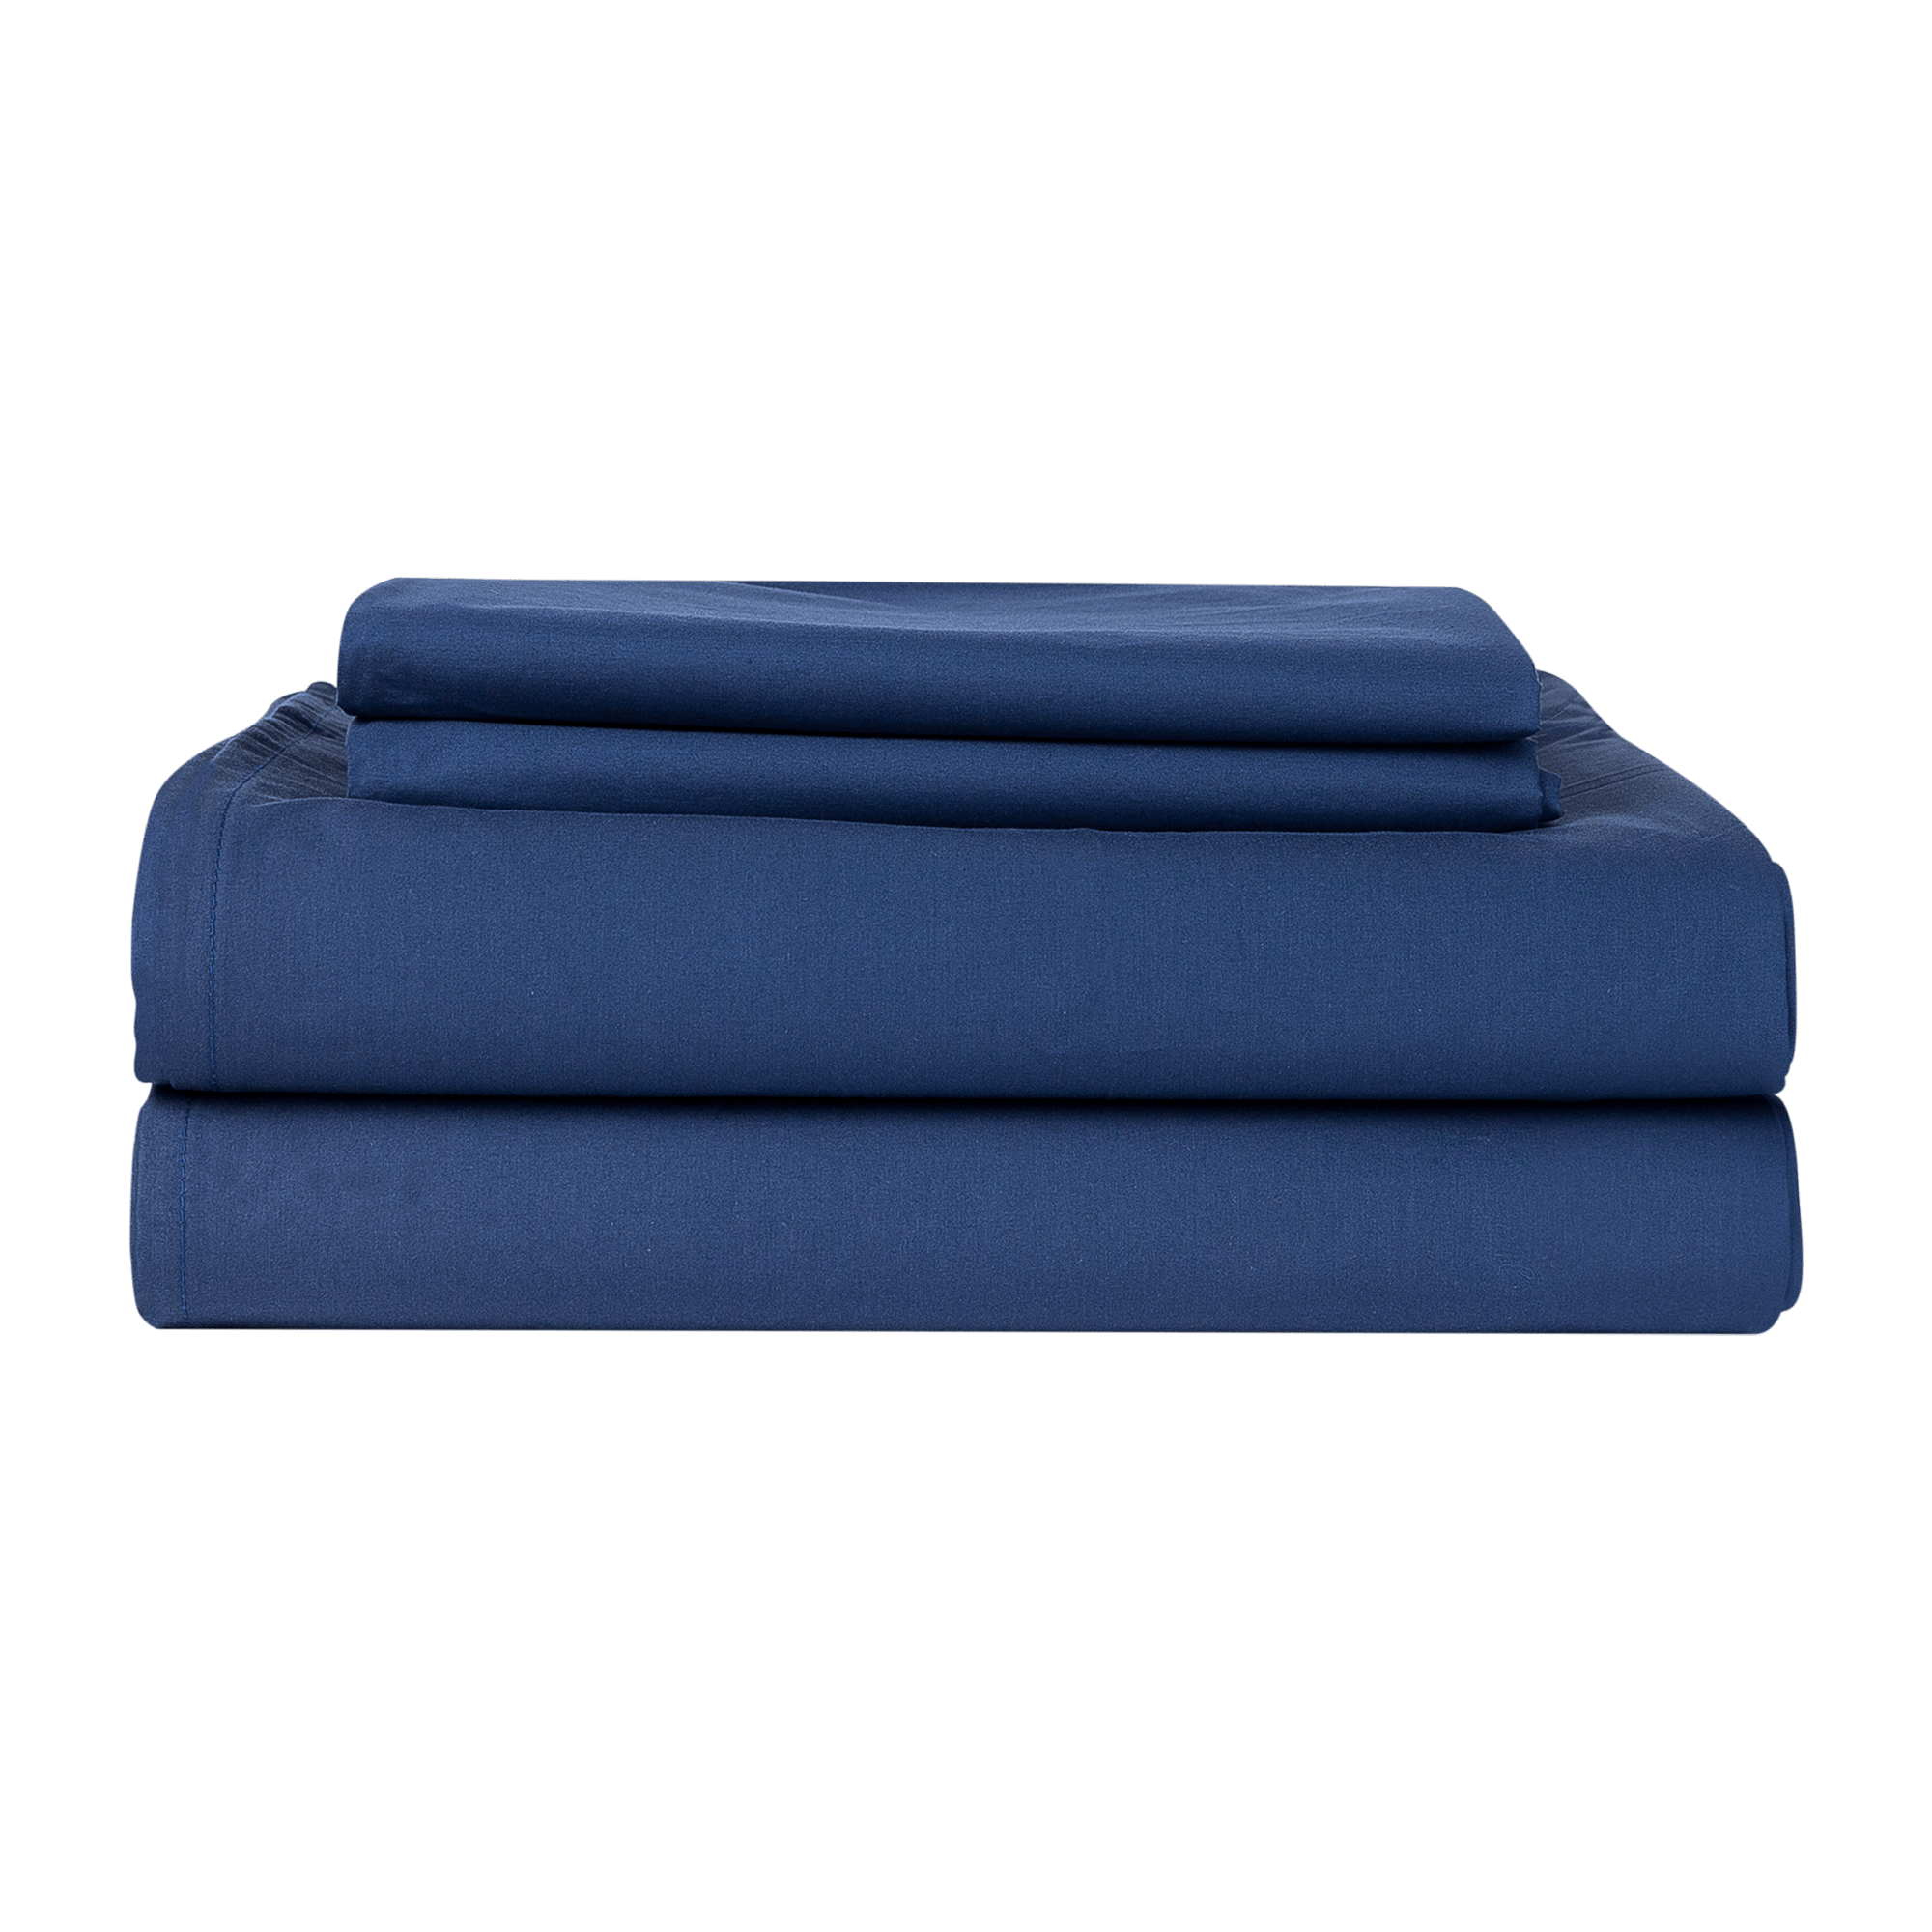 Essential Collection Percale Sheet set in Navy which includes 1 flat sheet, 1 fitted sheet and 2 pillowcases